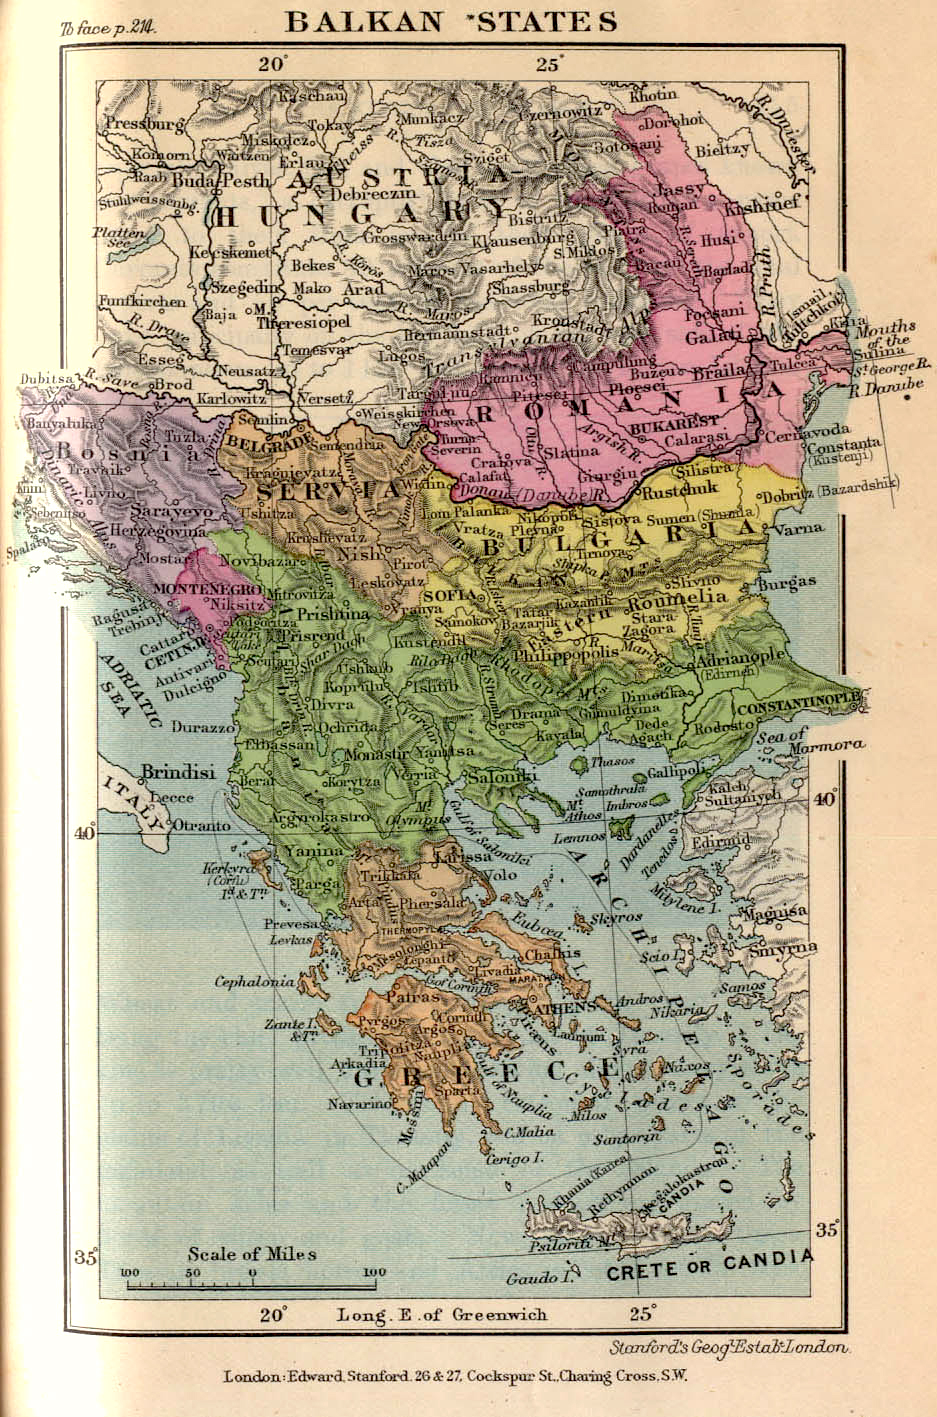 Map of the Balkan States 1899